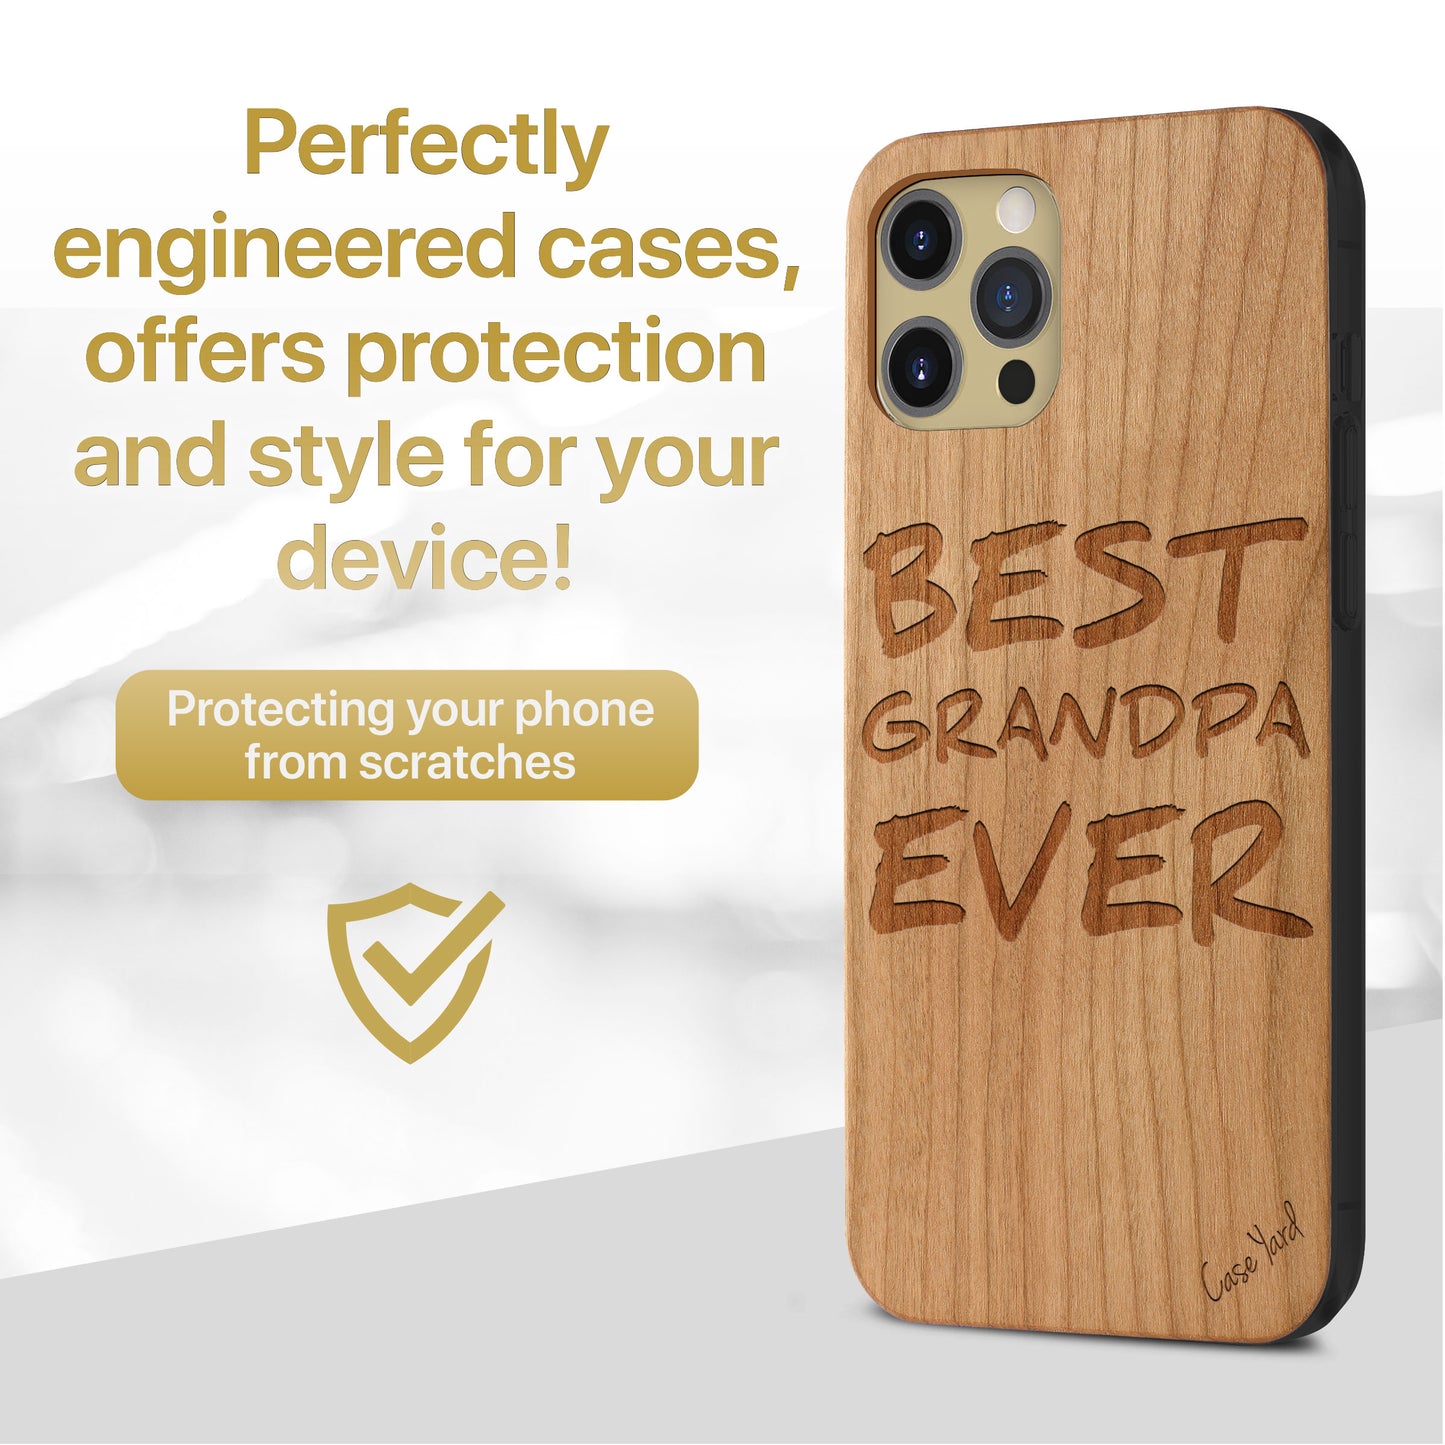 Wooden Cell Phone Case Cover, Laser Engraved case for iPhone & Samsung phone Best Grandpa Ever Design